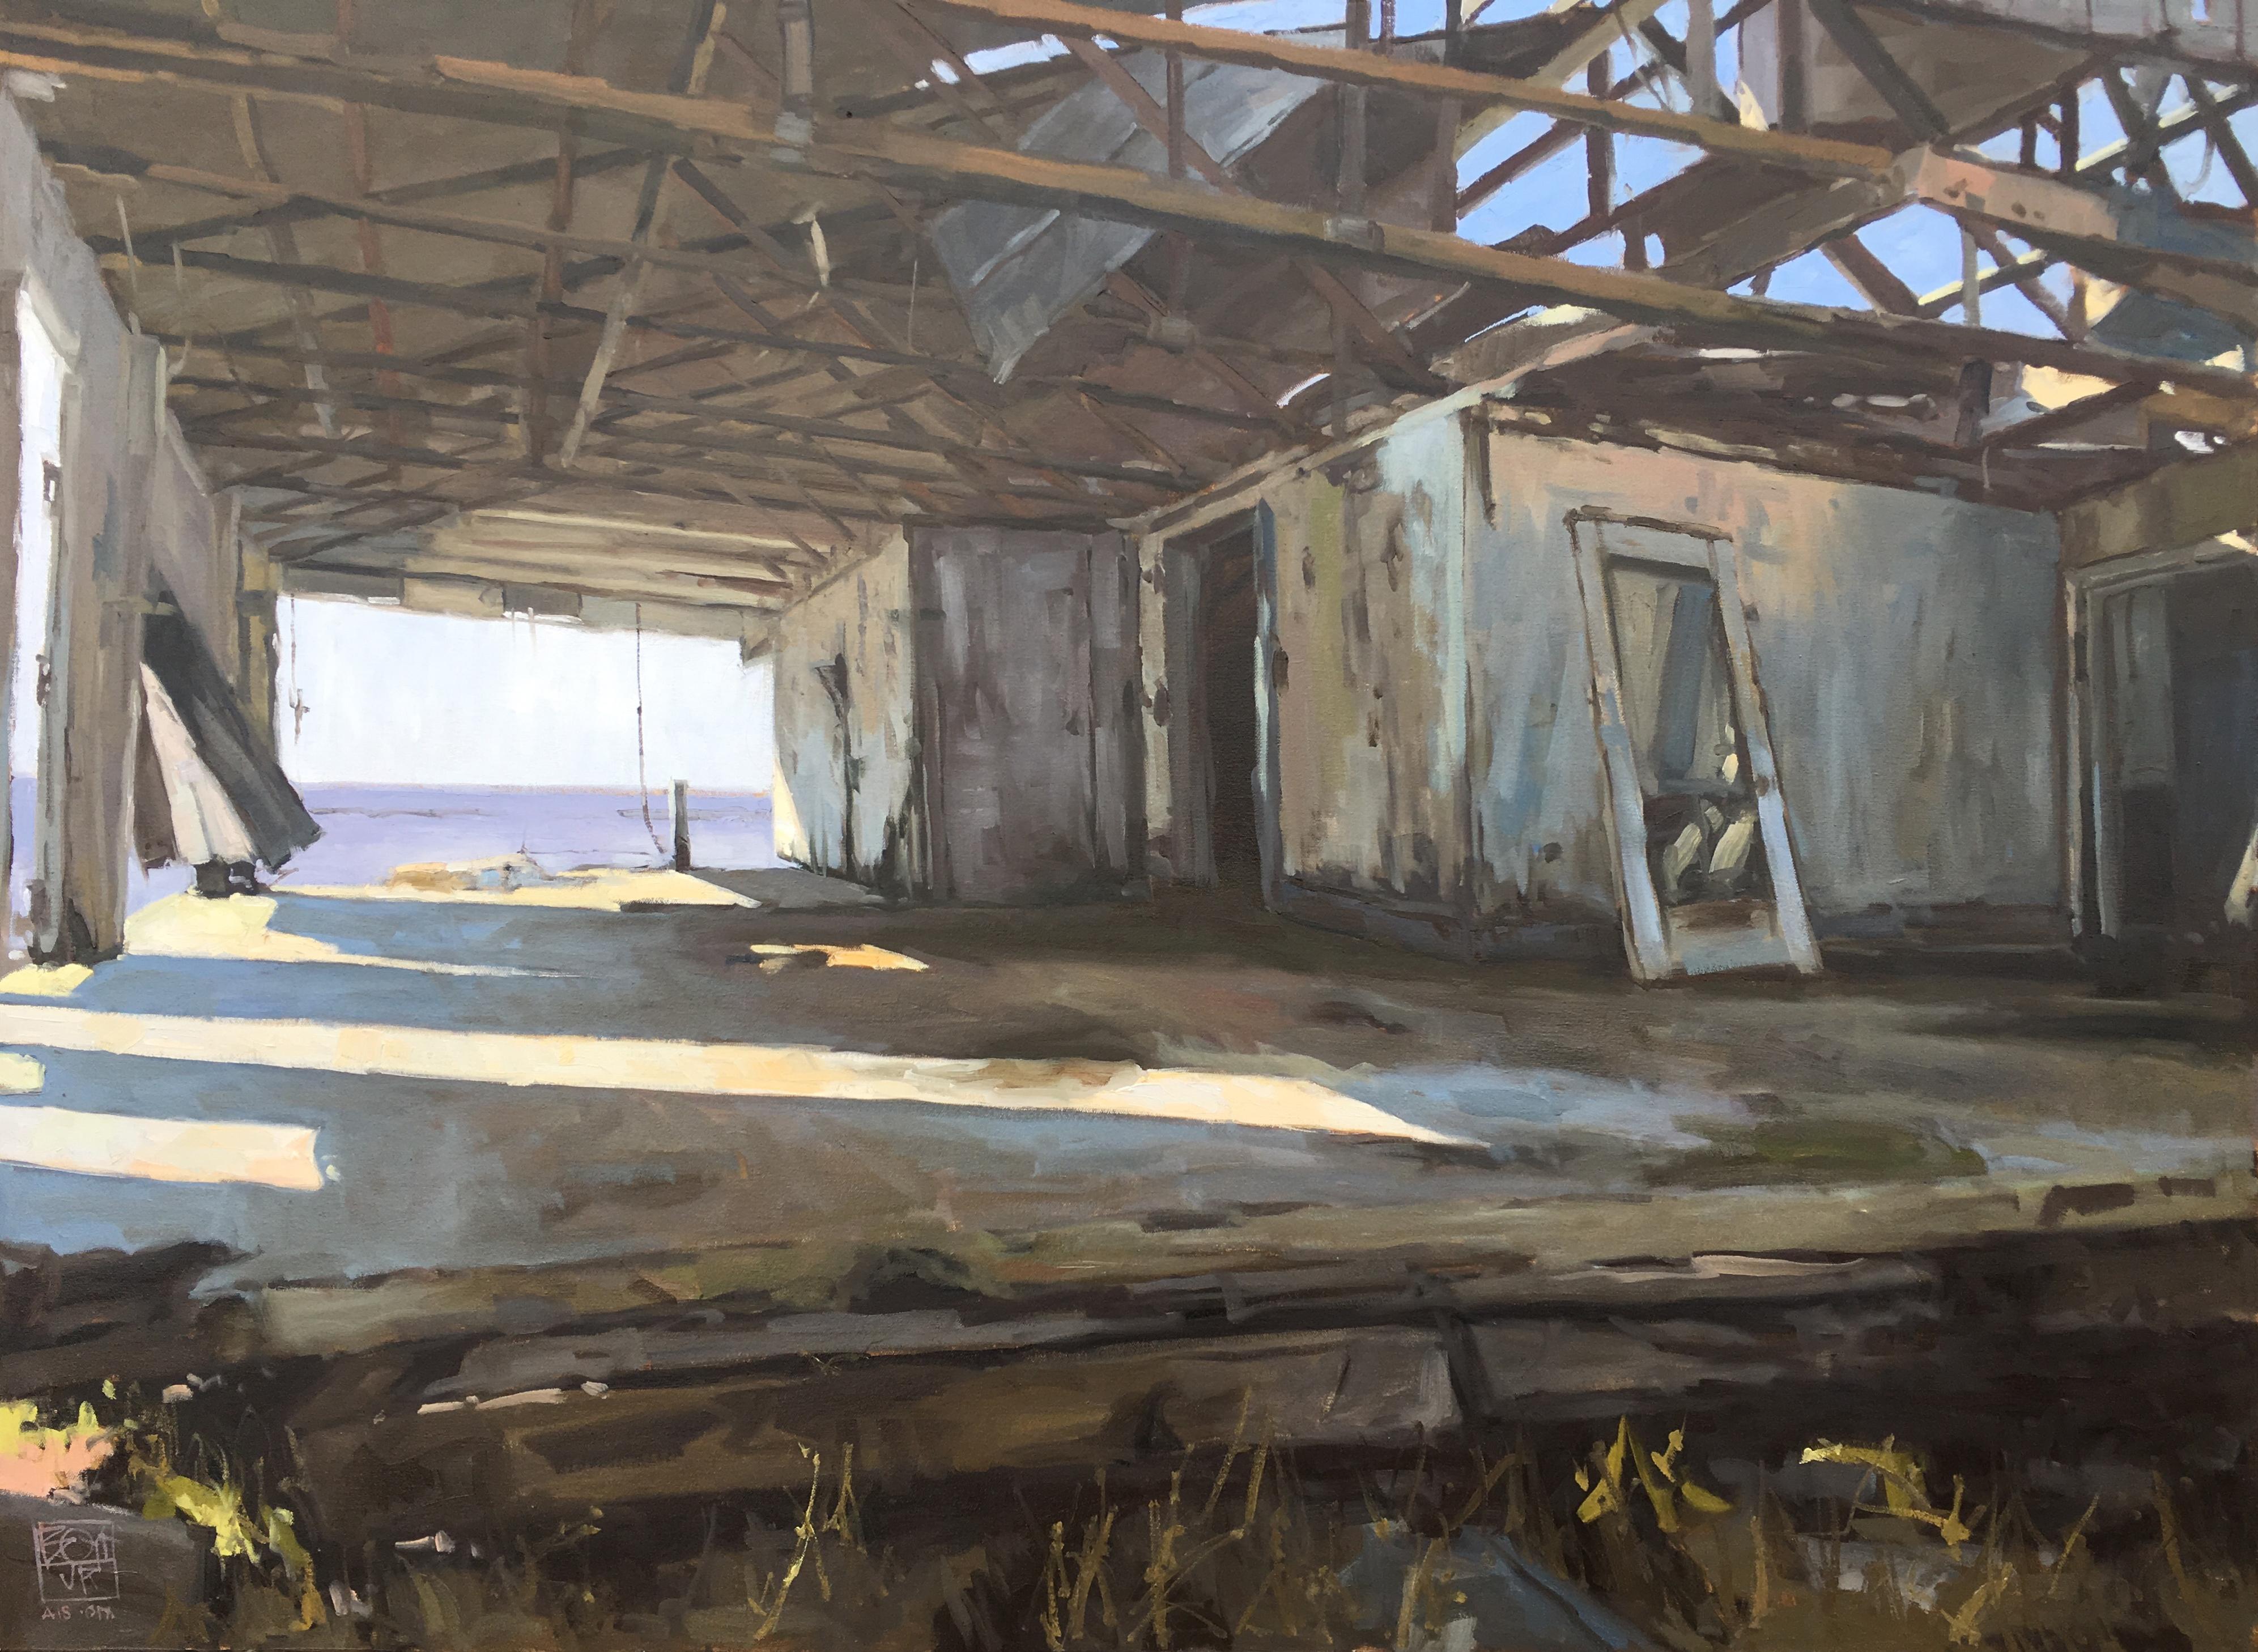 "Gulf View" is a plein air landscape painting featuring blue, grey, yellow and white hues.
David Boyd is inspired by the work of Edward Hopper, Andrew Wyeth and Winslow Homer.

David Boyd is a plein air artist who paints the Southeast’s urban and